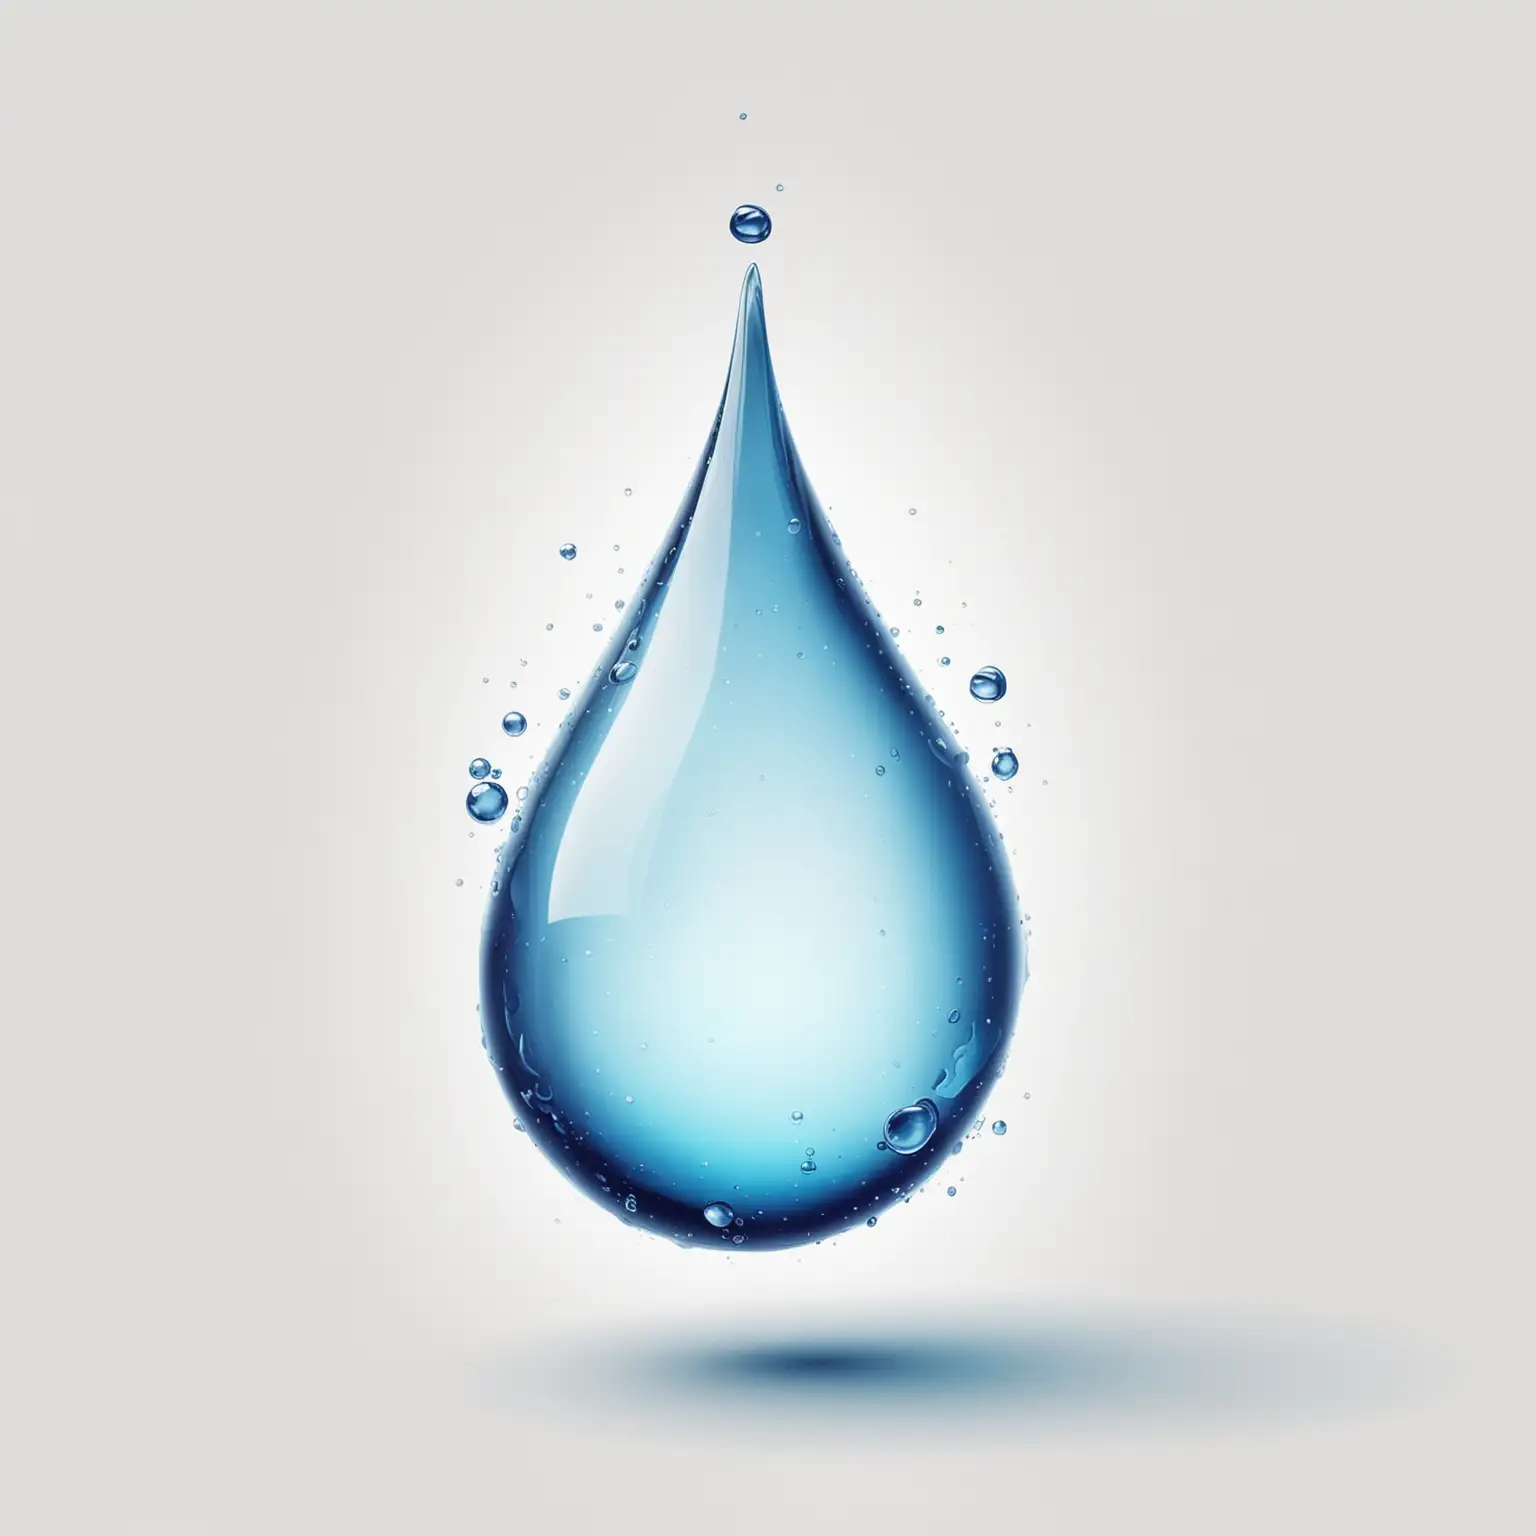 Realistic Blue Water Drop Illustration on White Background